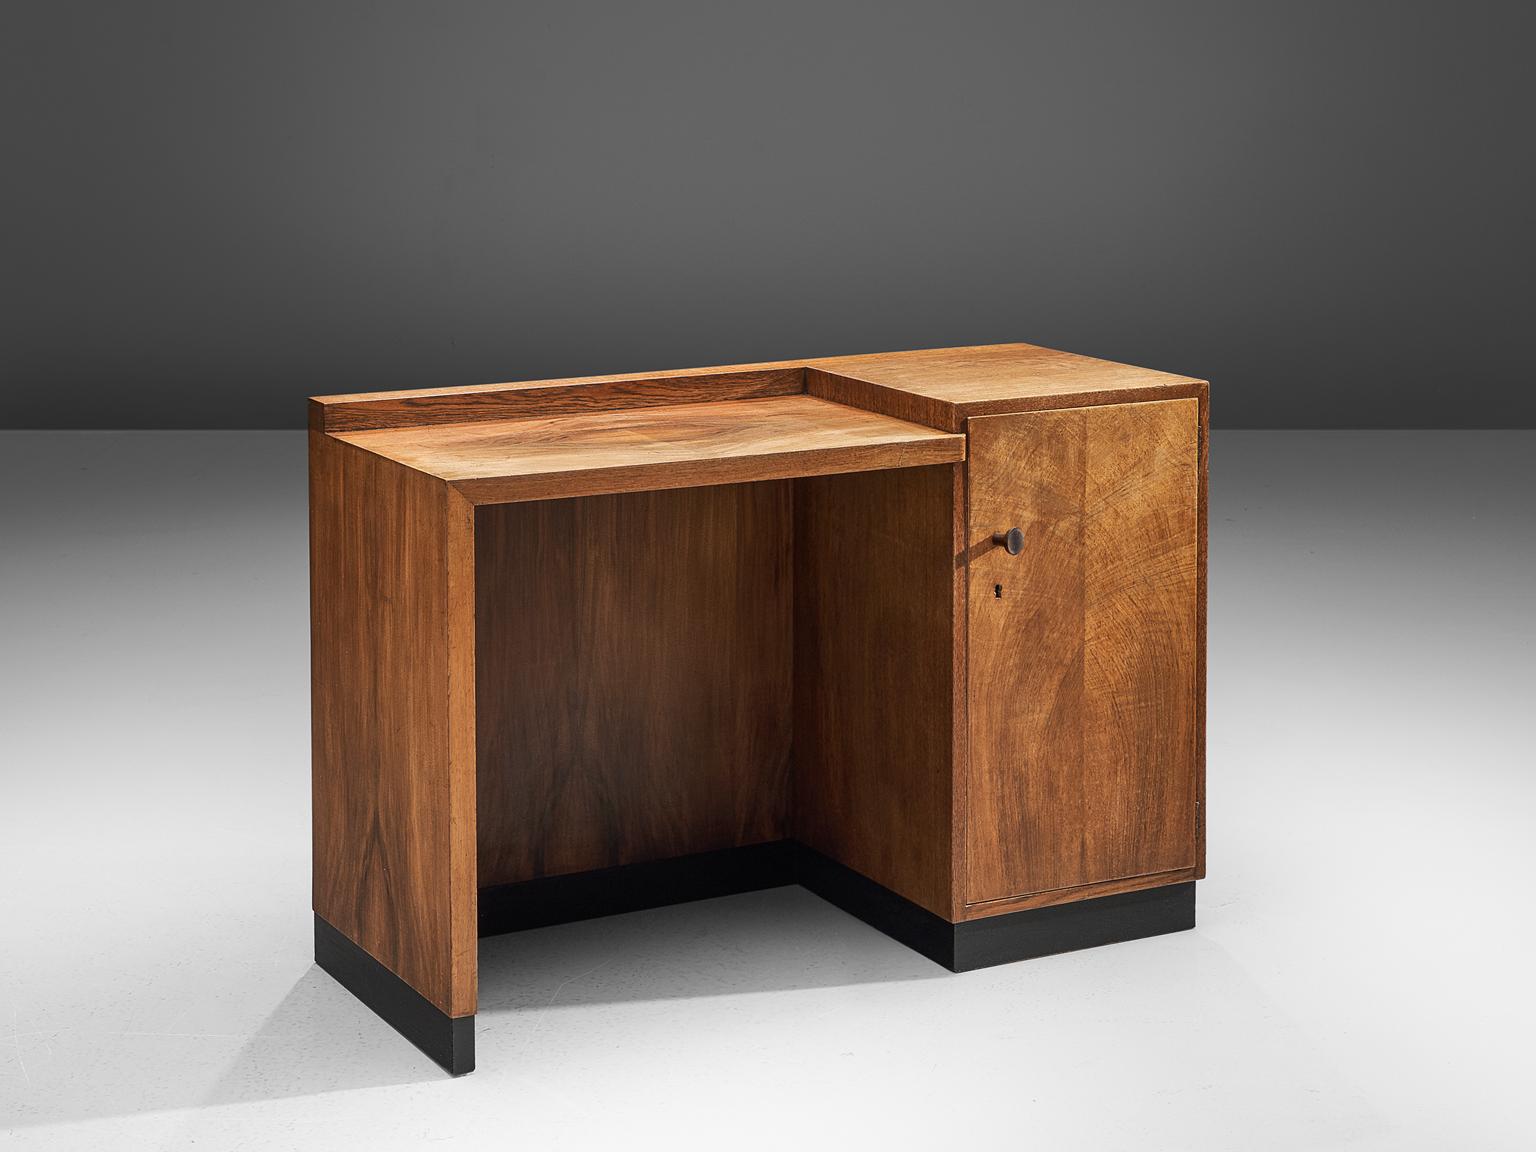 Art Deco Desk, mahogany, The Netherlands, 1930s.

This desk is designed is strong in its design as it features strict lines with a balanced ratio that is known for Dutch Art Deco style. It resembles features of the Amsterdam School by means of the